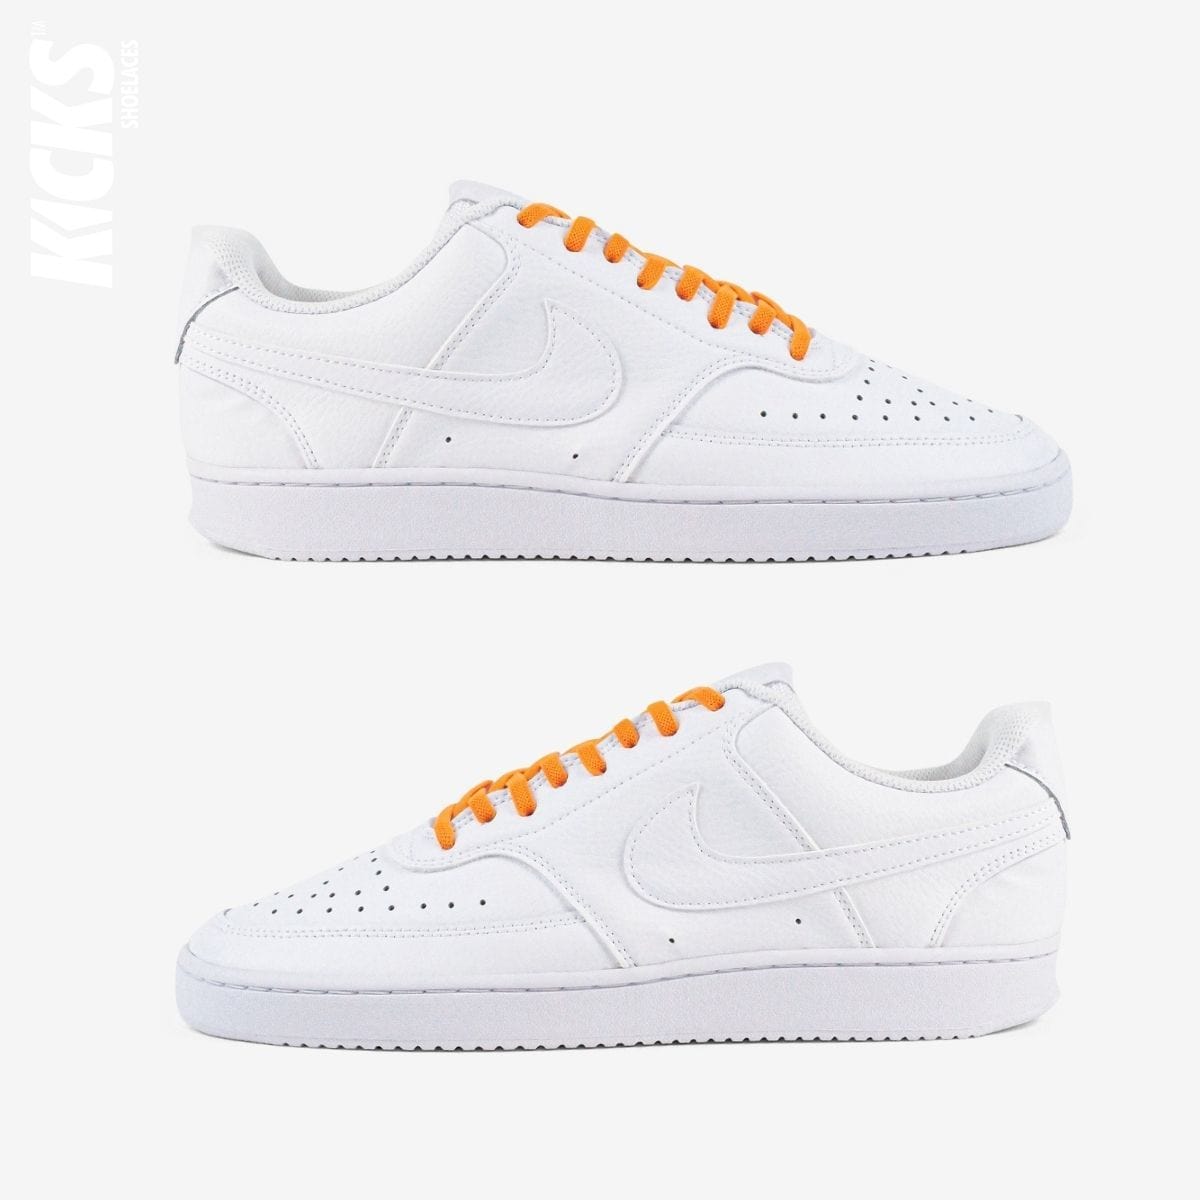 tieless-laces-with-orange-laces-on-nike-white-sneakers-by-kicks-shoelaces